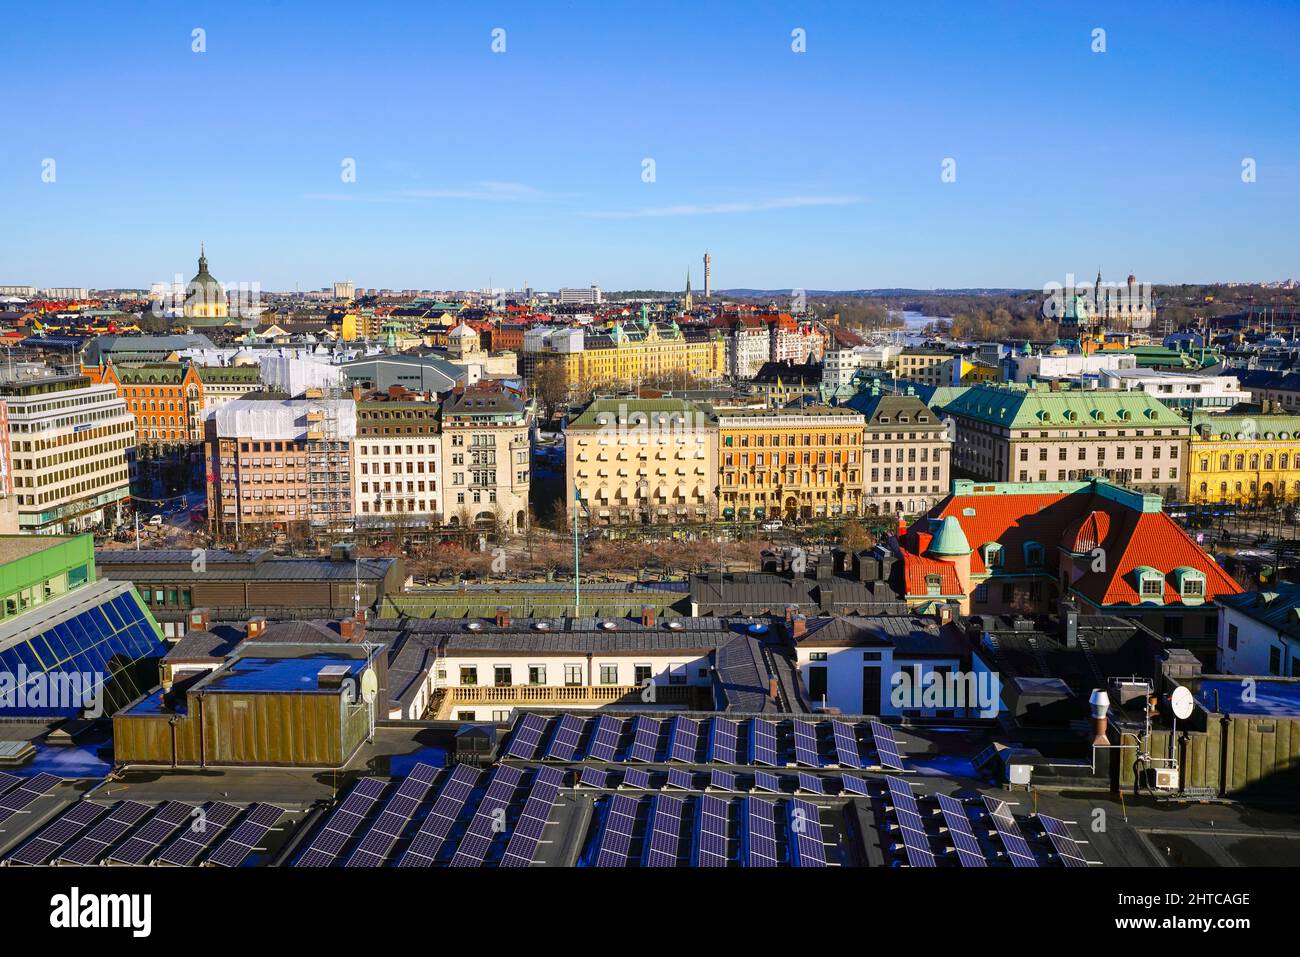 Wonderful view of Stockholm skyline. Sweden. Stockholm is the capital city, cultural,  political, and economic center of Sweden. Stock Photo